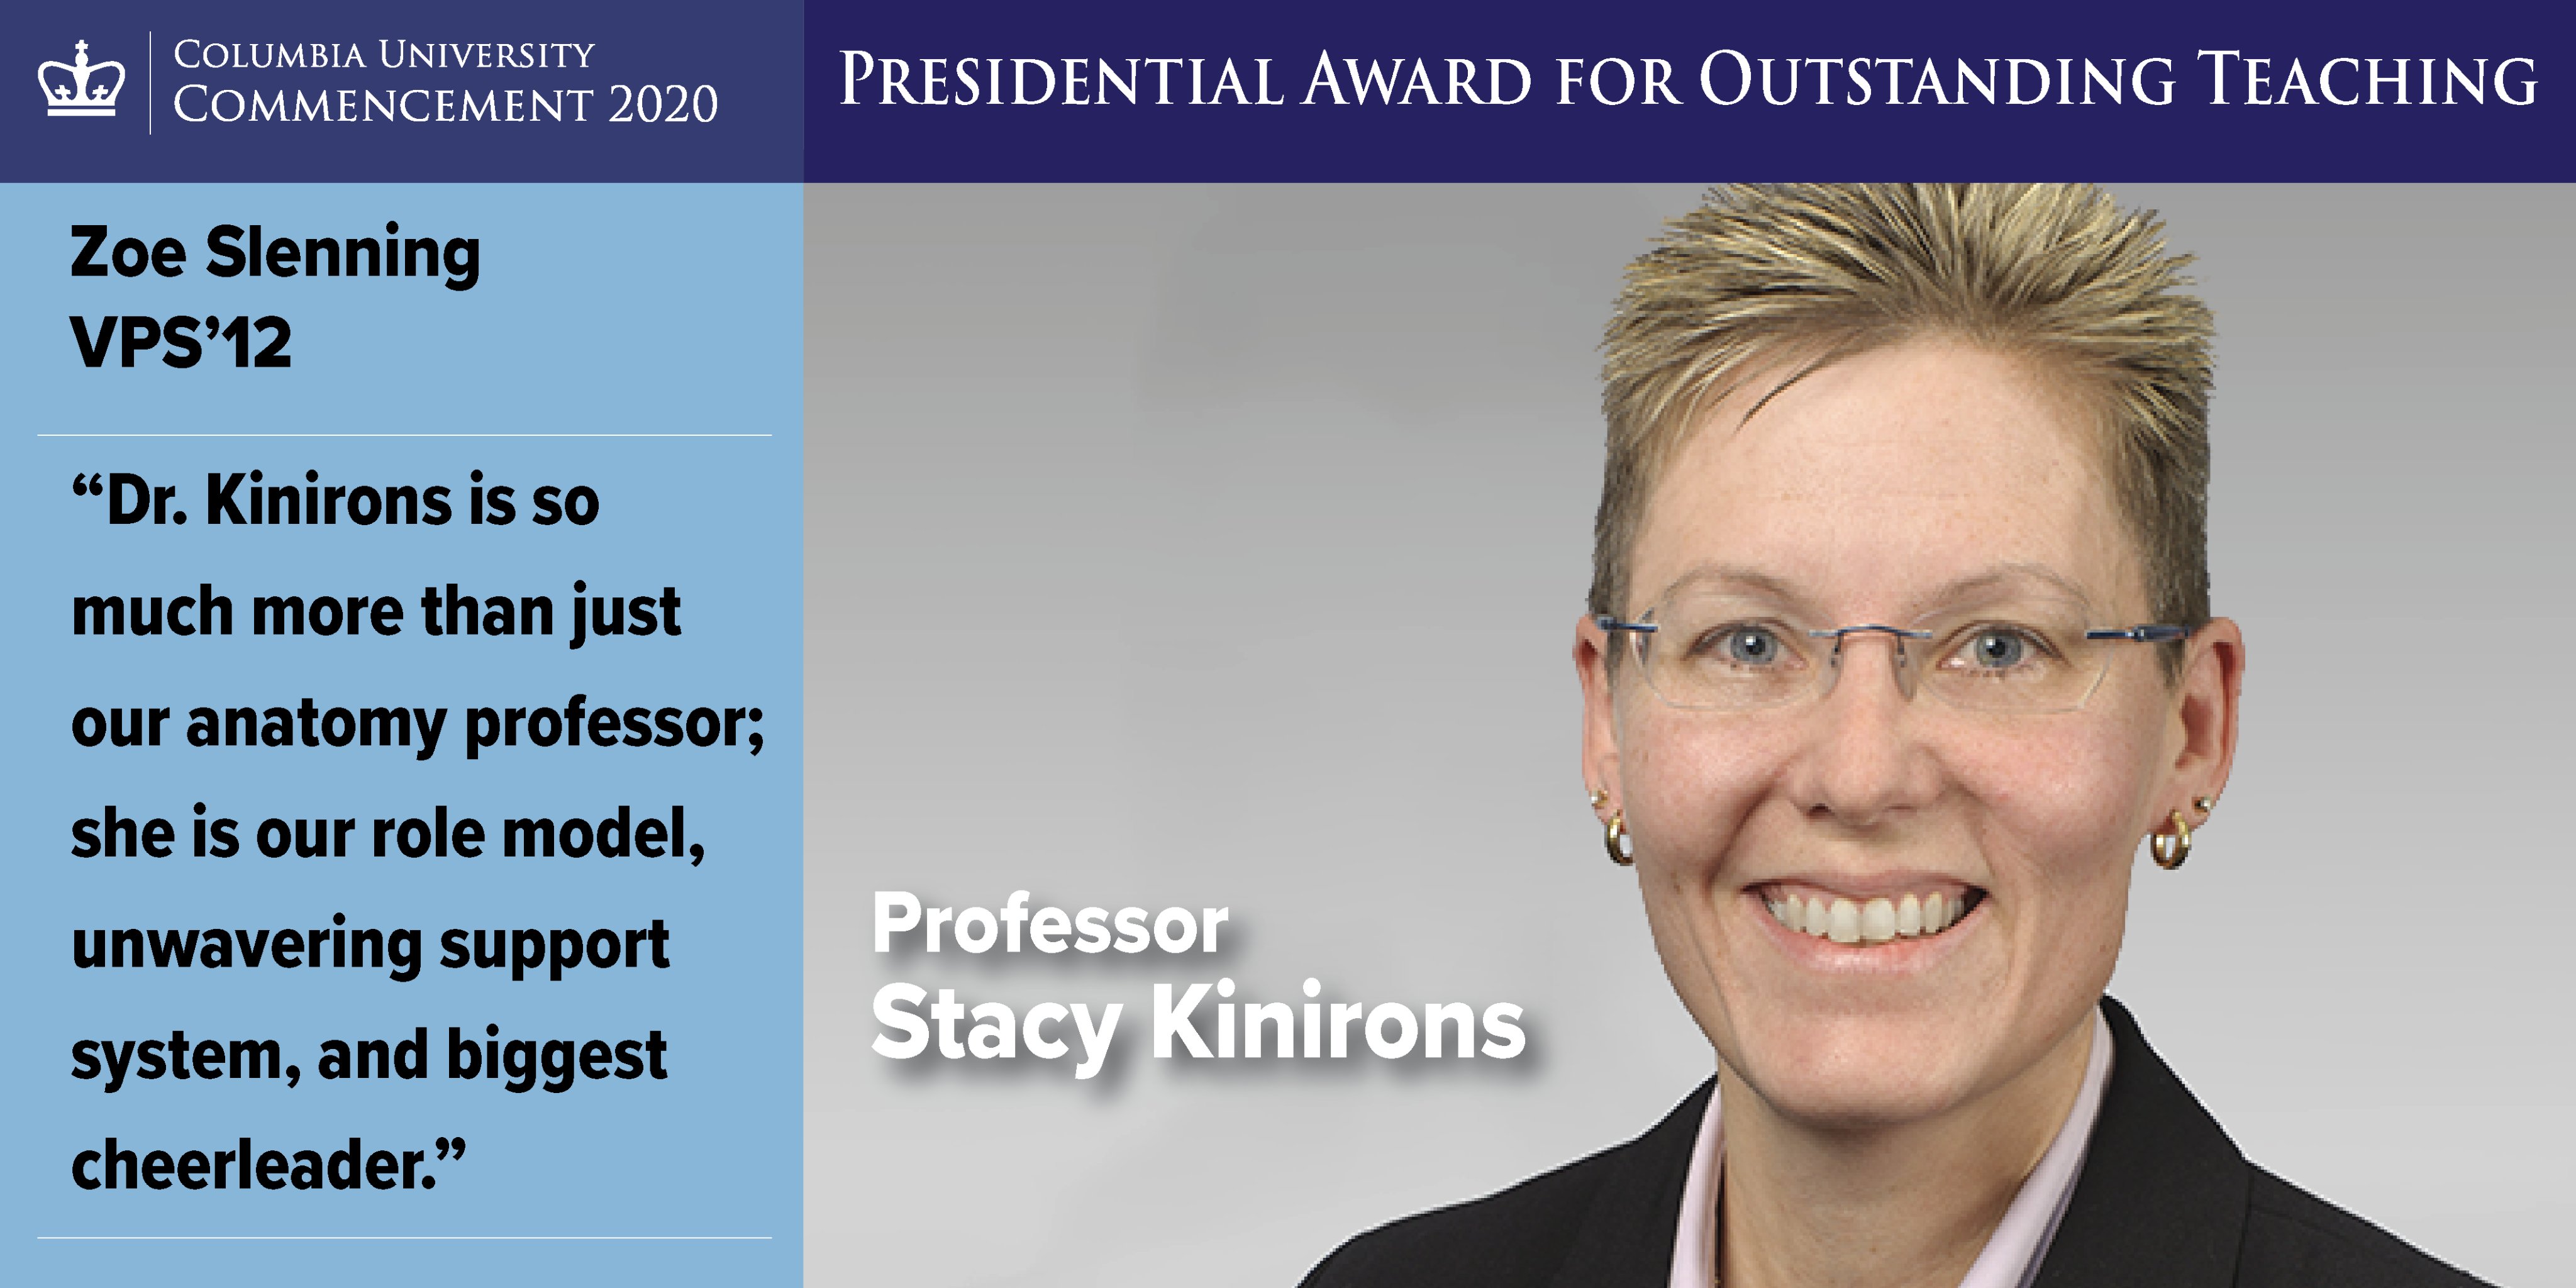 Columbia University on Twitter: "Columbia recognizes Stacy Kinirons,  Assistant Professor of Programs in Physical Therapy at @ColumbiaPS, with  the 2020 Presidential Award for Outstanding Teaching. @ColumbiaMed  https://t.co/vZO8X3hVyd #RoarLions2020 ...